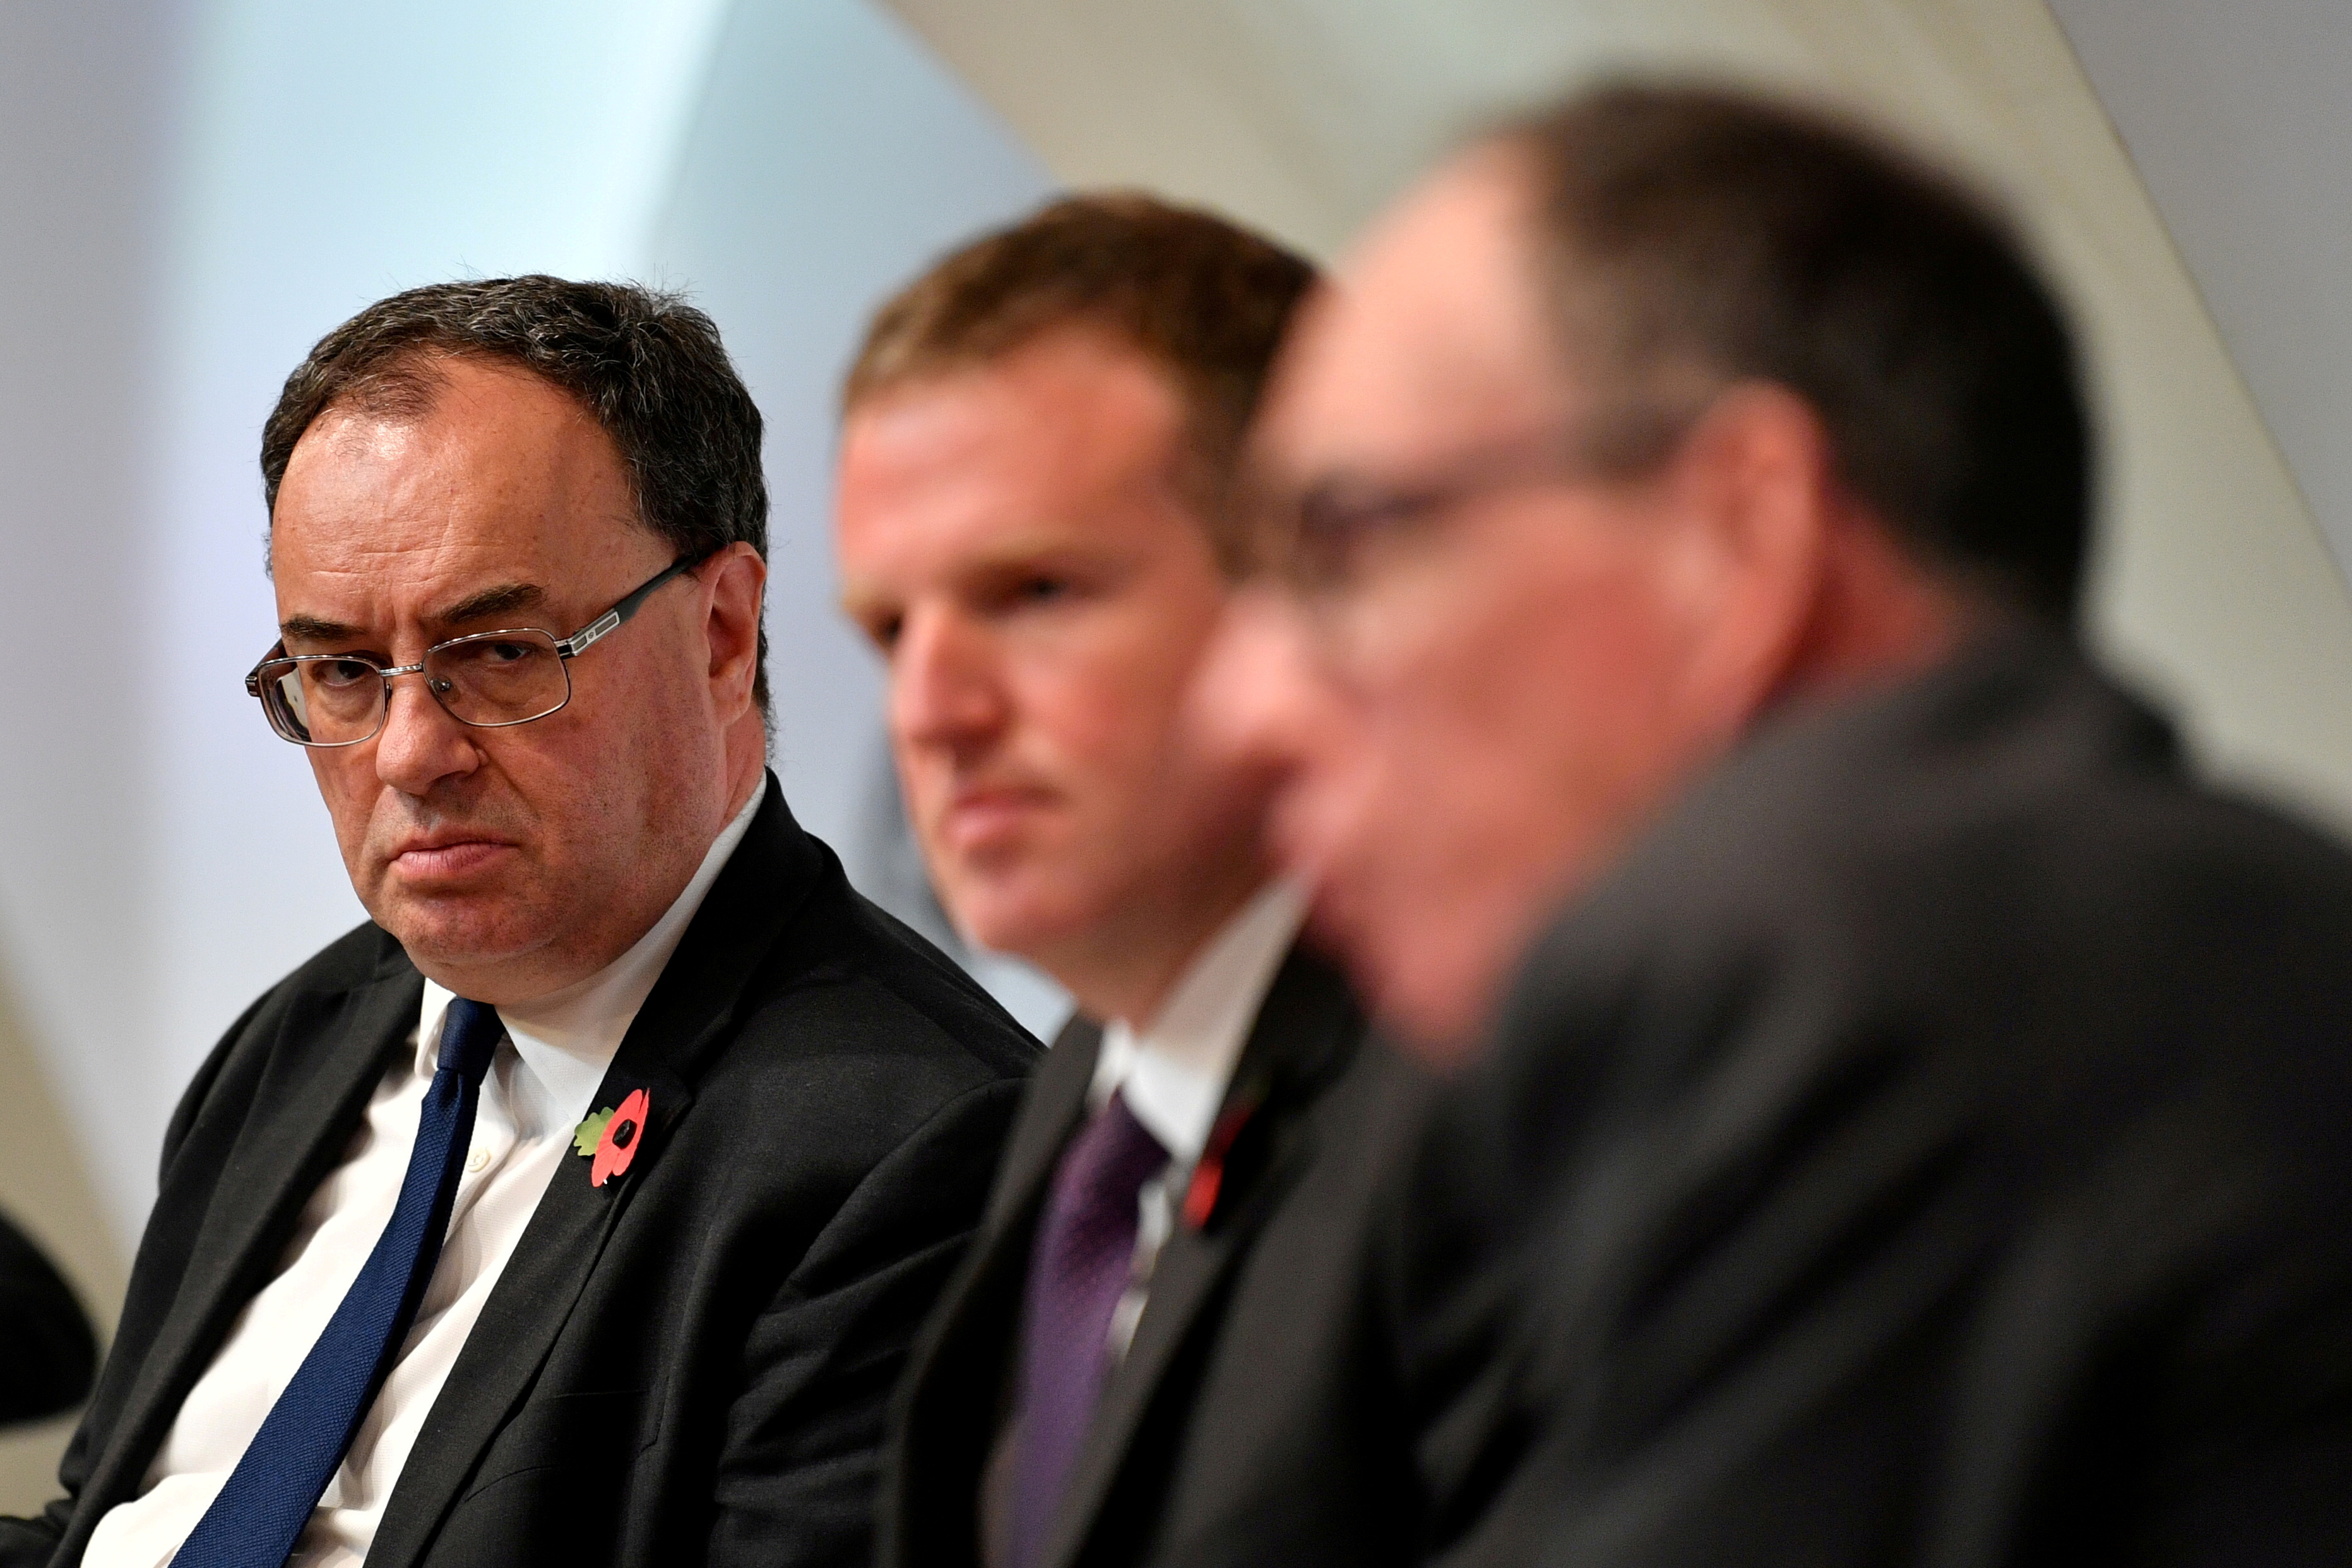 Governor of the Bank of England Andrew Bailey attends the Monetary Policy Report Press Conference, in London